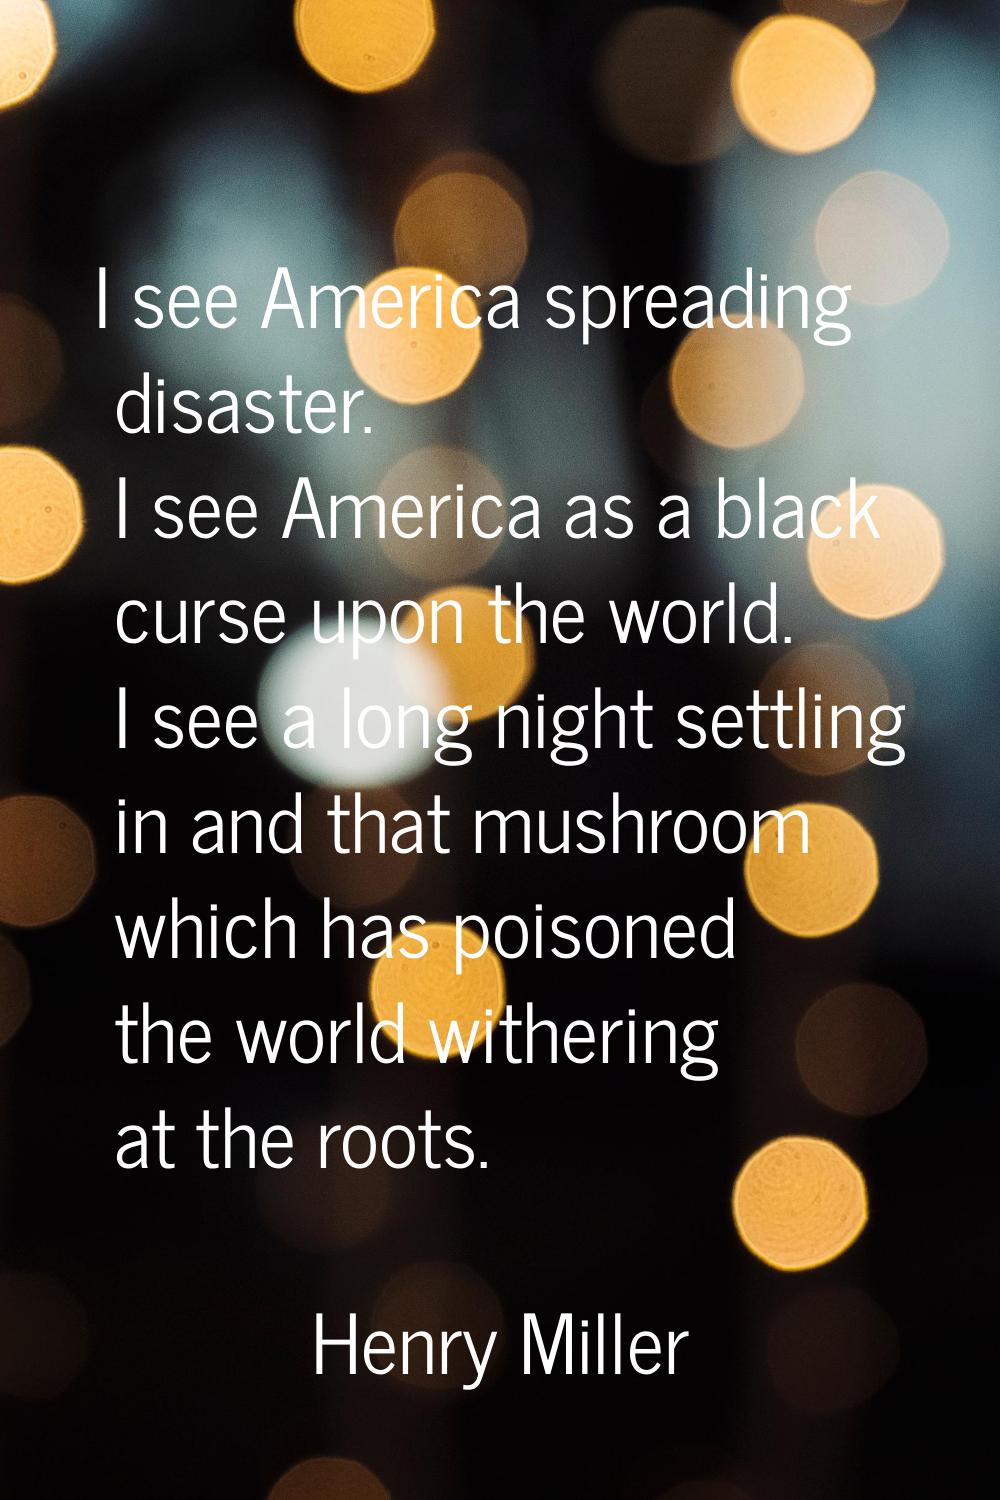 I see America spreading disaster. I see America as a black curse upon the world. I see a long night